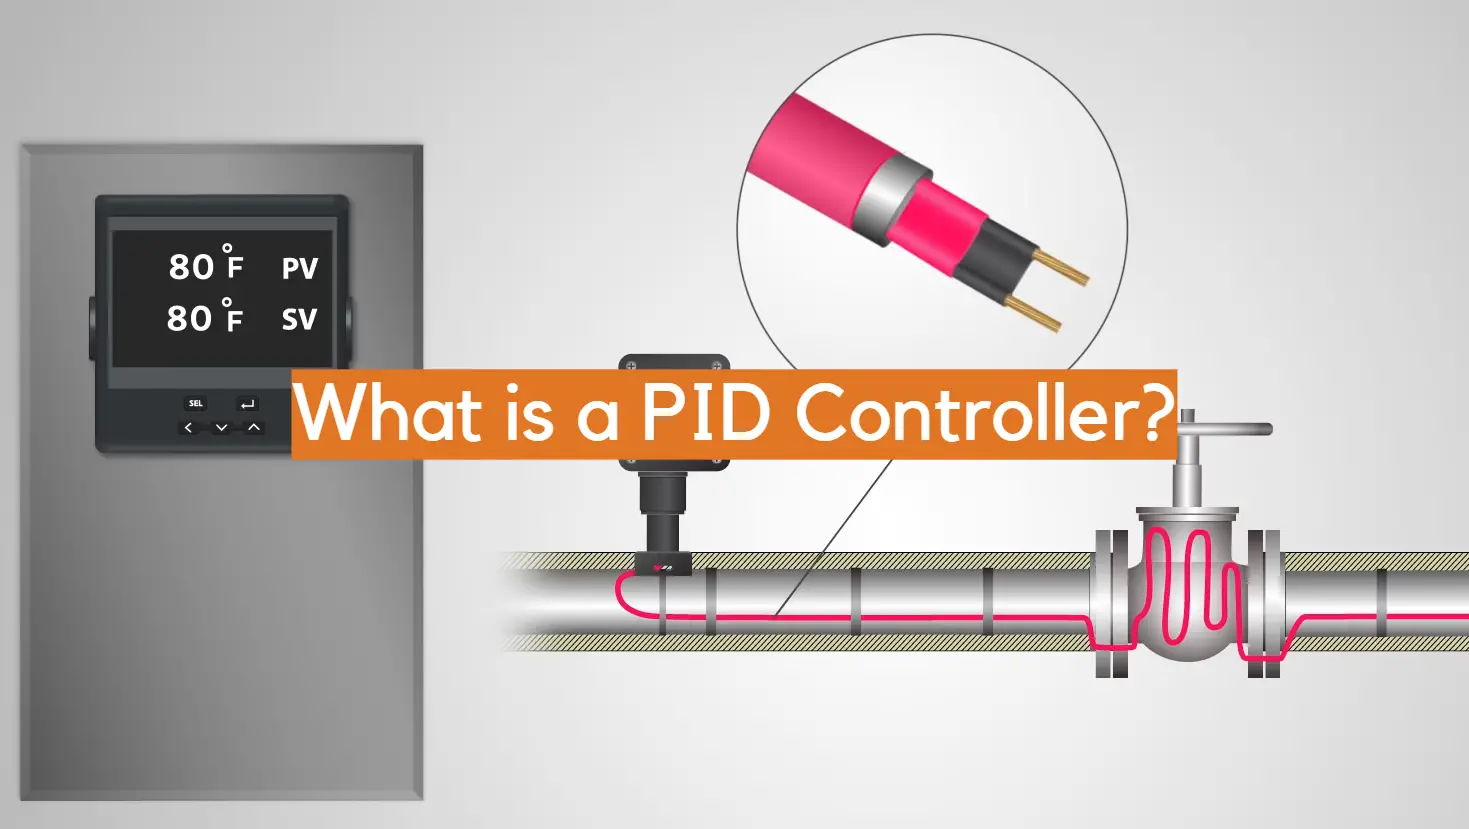 What is a PID Controller?